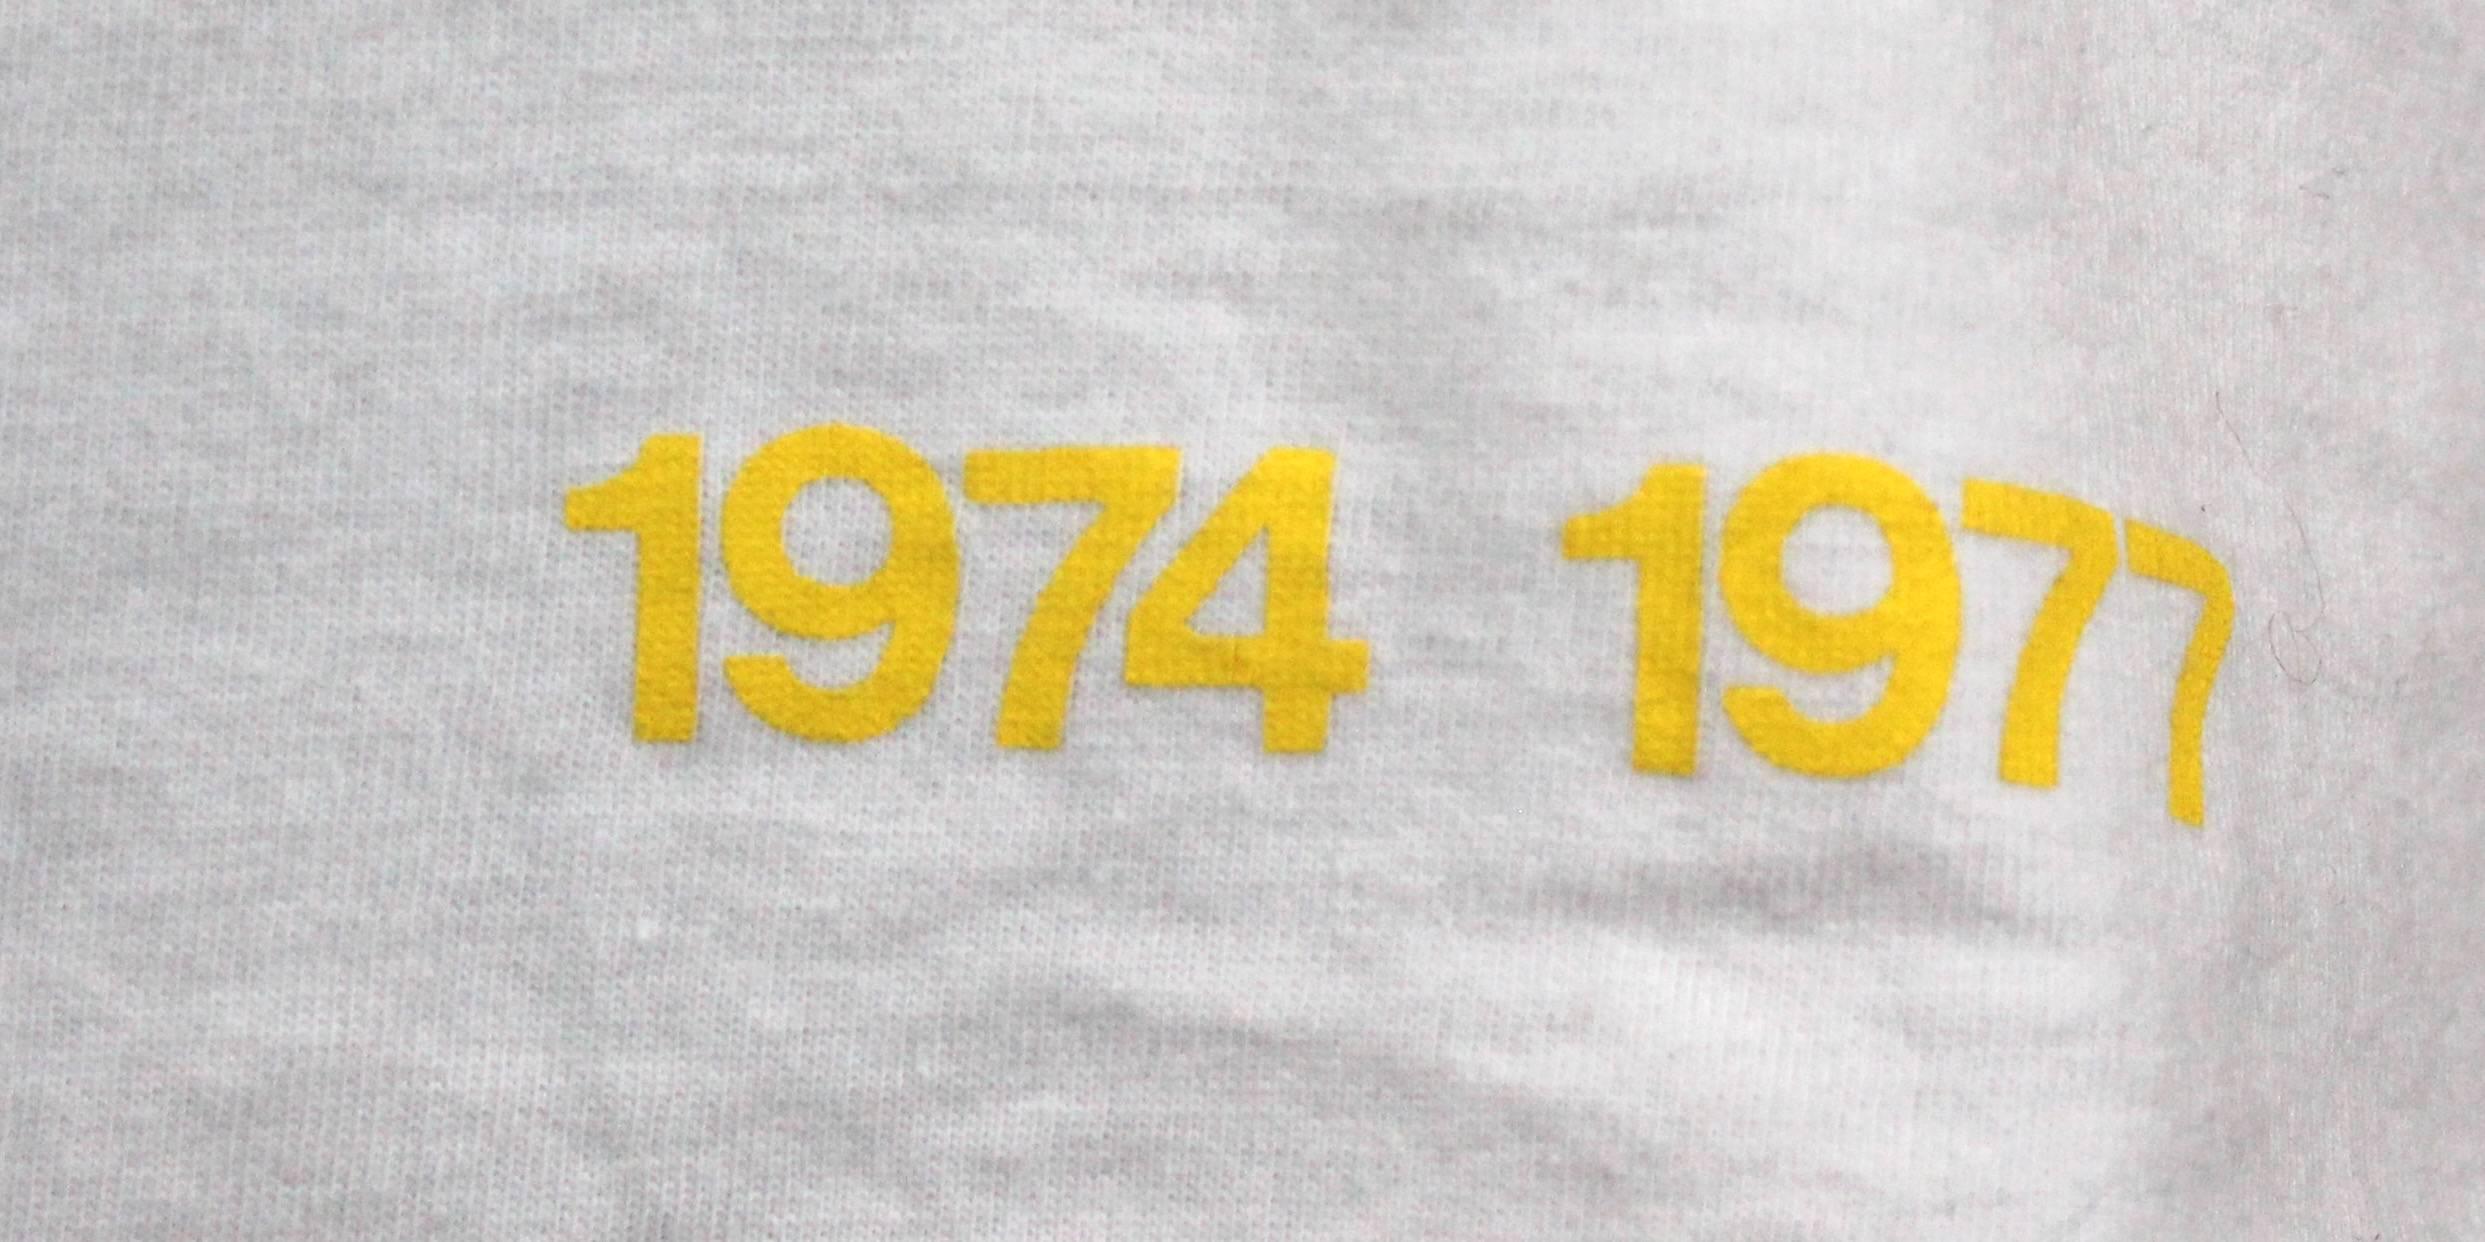 -Vivienne Westwood t-shirt with SEX logo (SEX was the name of Vivienne Westwood's store from 1974 - 1977) 
-Has text in yellow that reads : 